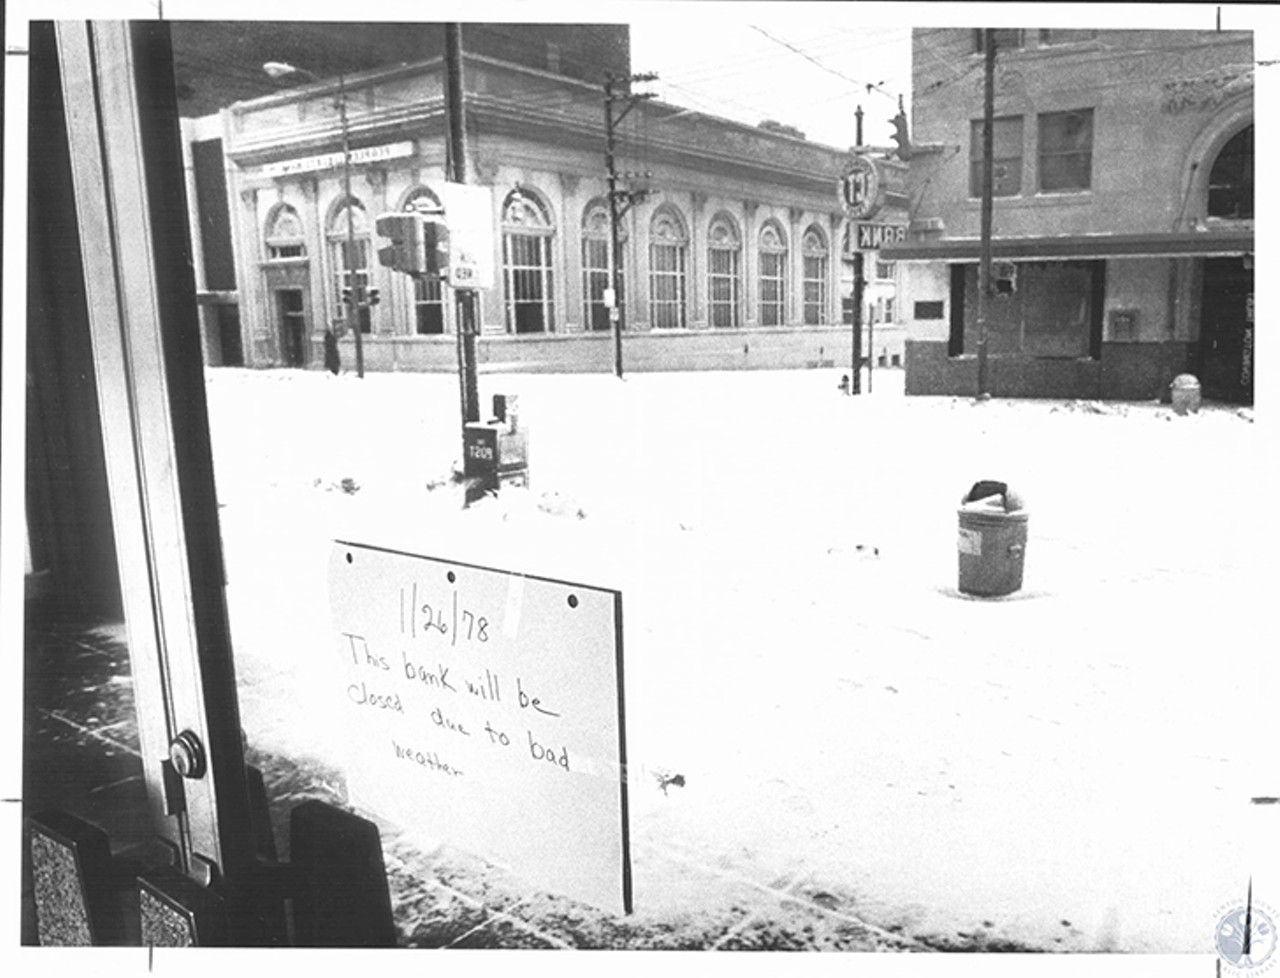 Covington
"View from First National Bank of 6th and Madison and banks closed due to weather"